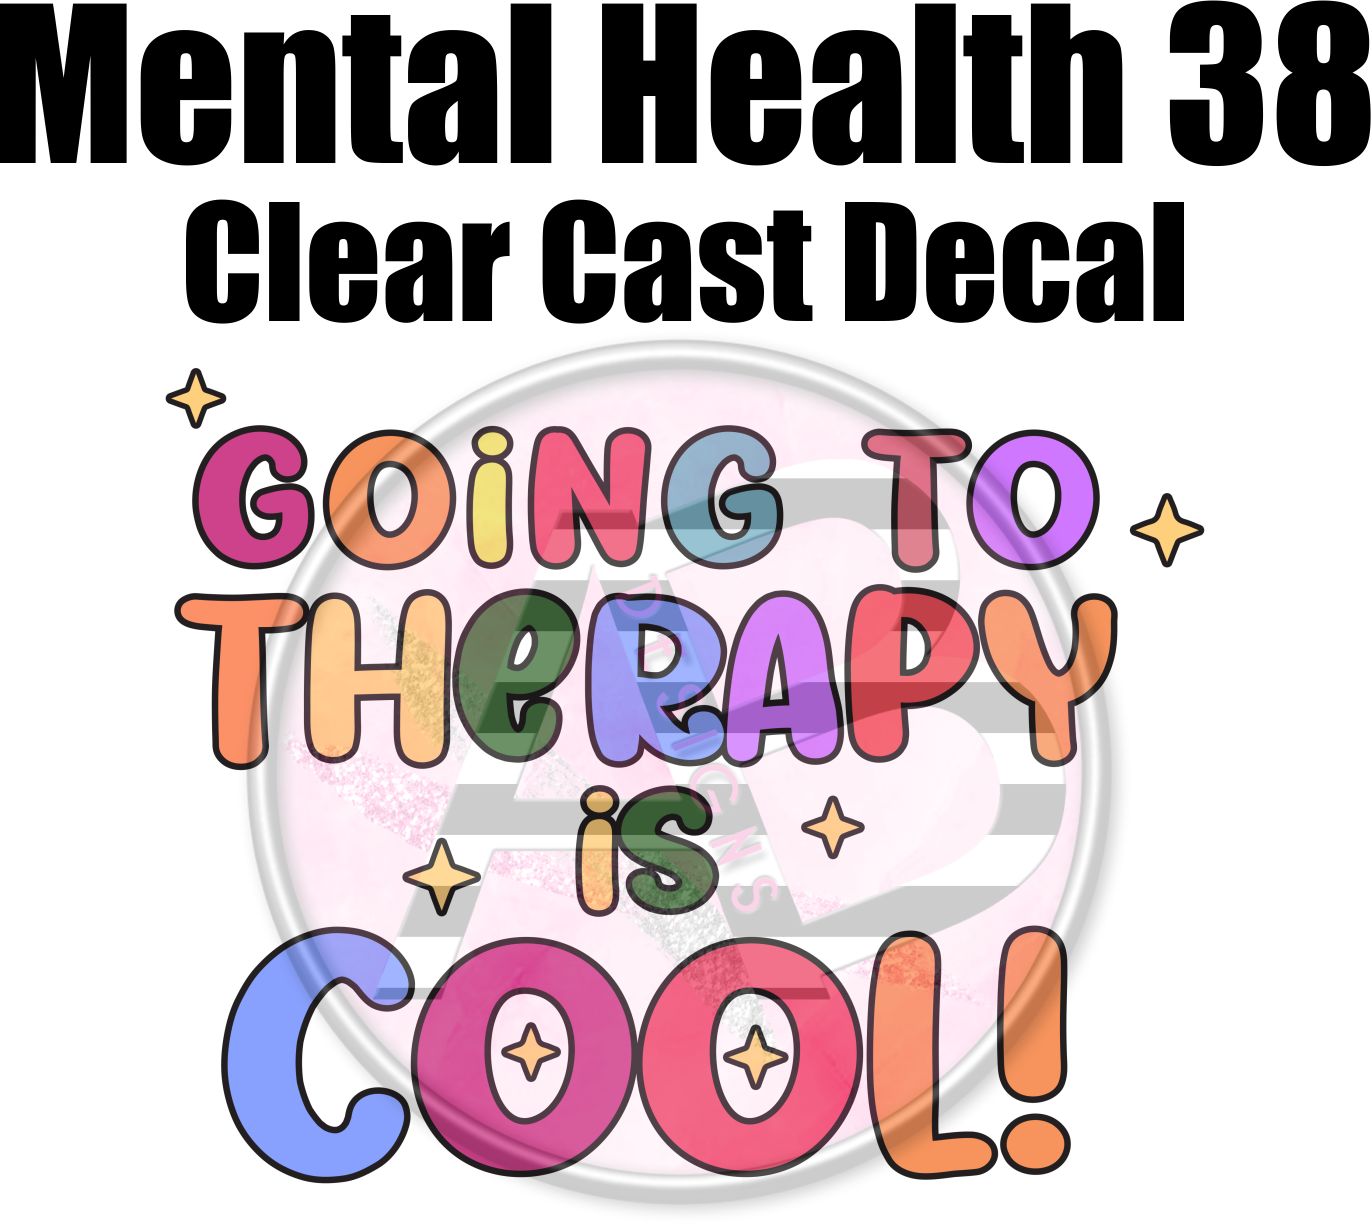 Mental Health 38 - Clear Cast Decal - 331